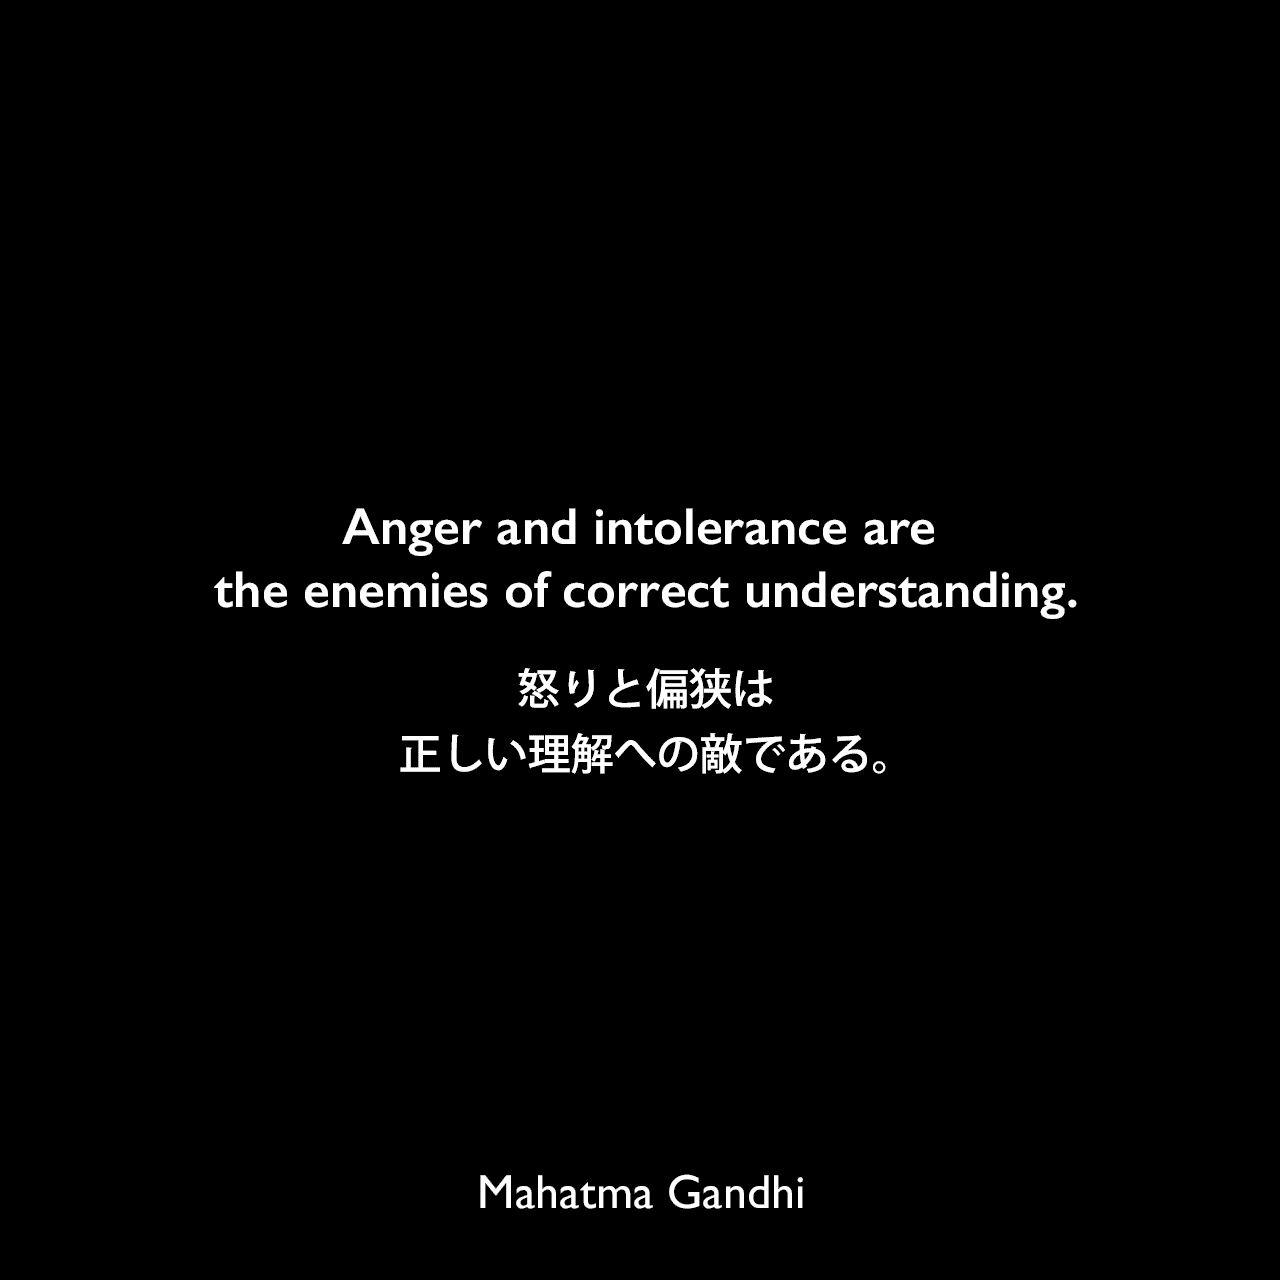 Anger and intolerance are the enemies of correct understanding.怒りと偏狭は、正しい理解への敵である。Mahatma Gandhi